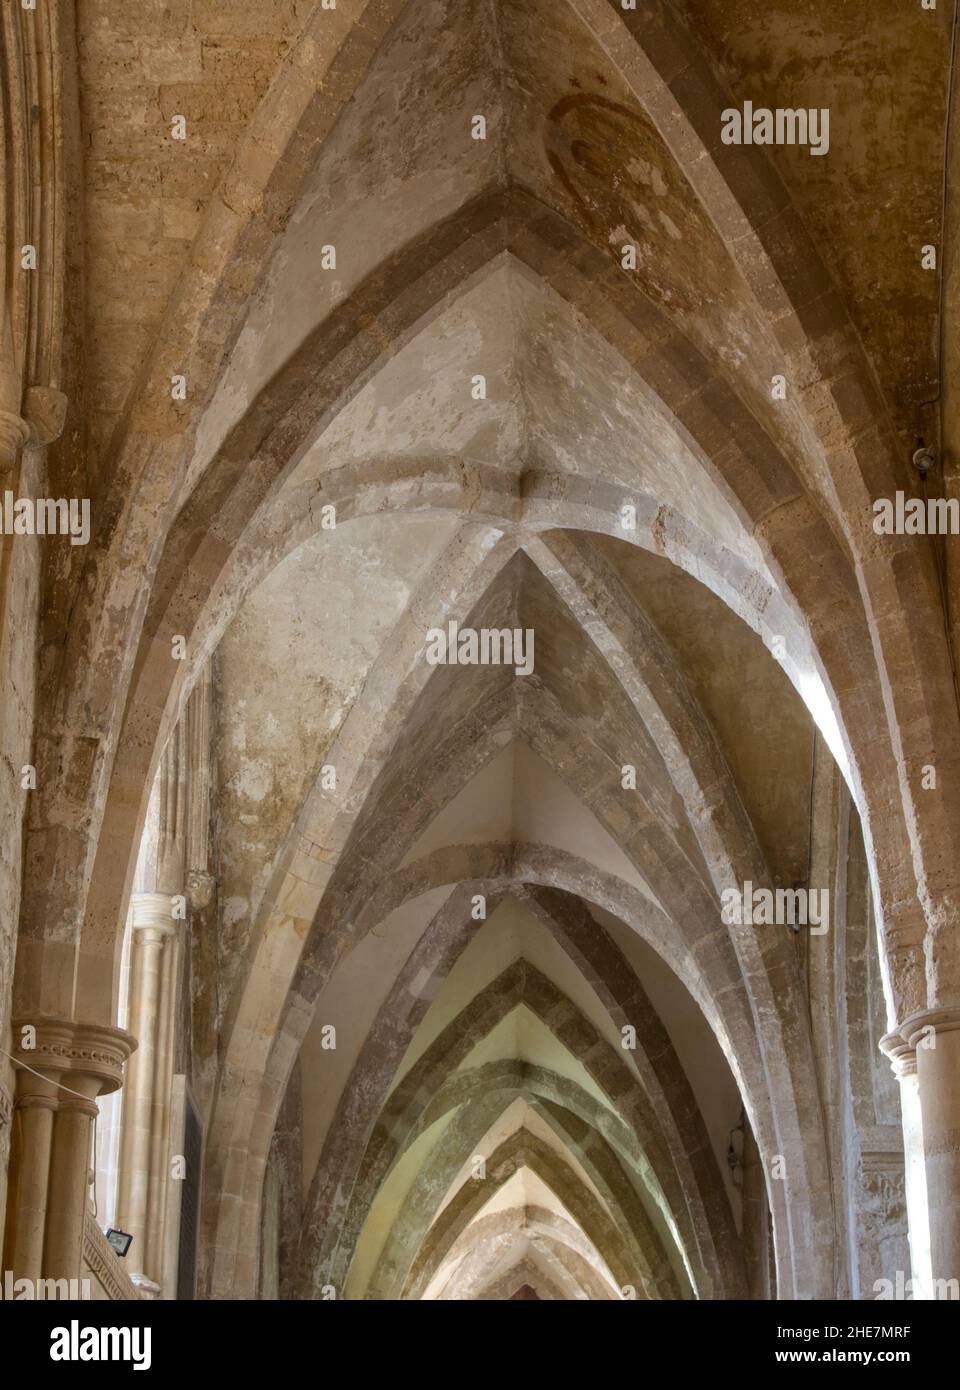 Stone Quadripartite Rib, Ribbed Vault Roof, Arches and Arch Windows, Christchurch Priory UK Stockfoto